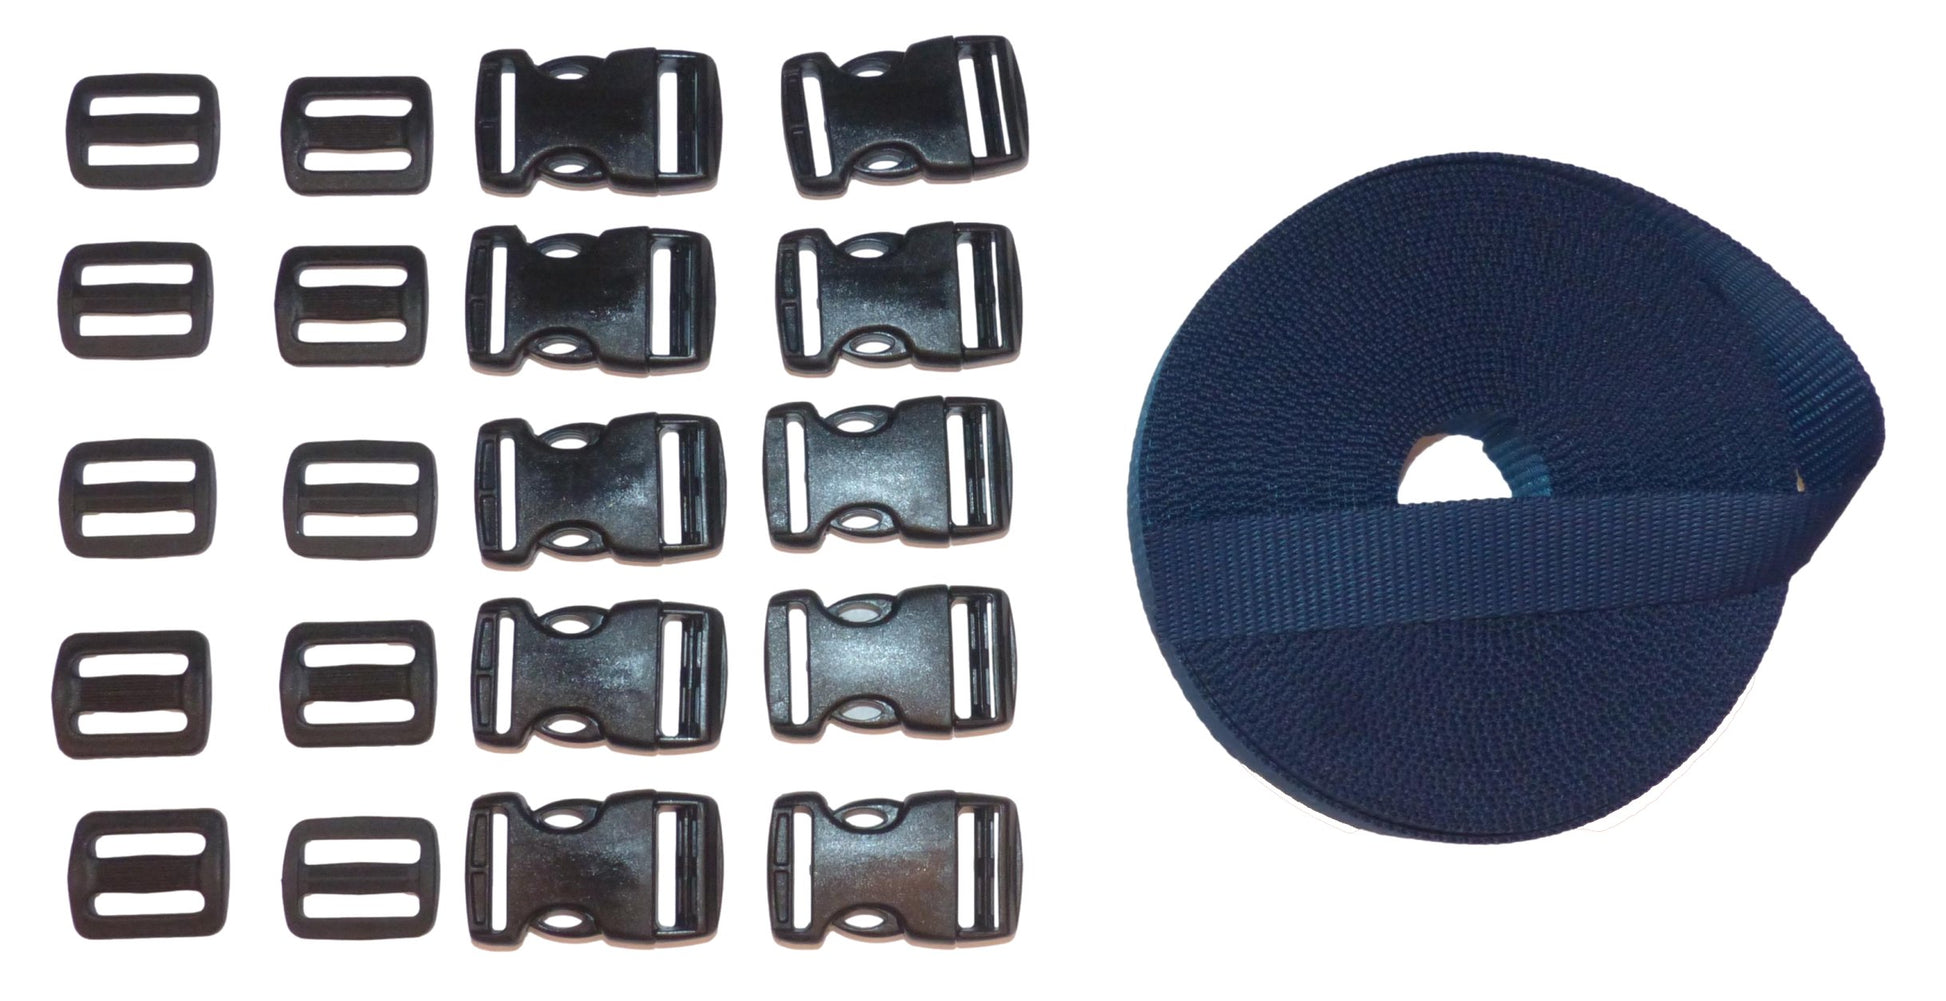 Benristraps 25mm Heavy-Duty Webbing and Branded  Buckle Sets for Straps, Bags, Crafts in navy blue